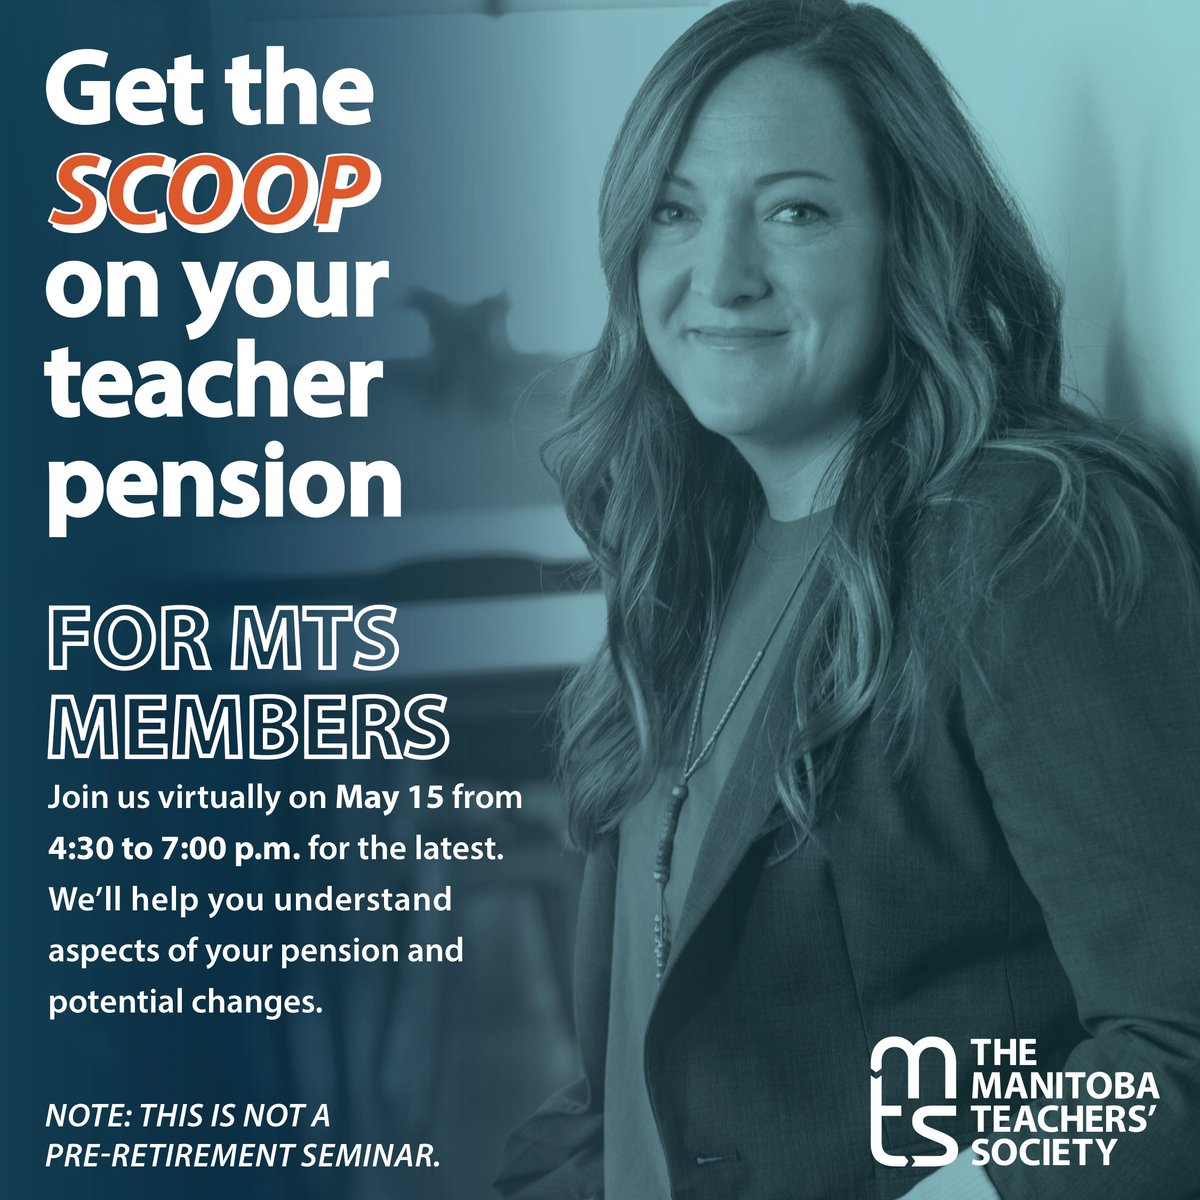 MTS members! Get the scoop on your teacher pension. Register at buff.ly/2qgf1o8 and join us virtually from 4:30 - 7:30 p.m. on May 15. We'll help you understand aspects of your pension and potential changes. This is not a retirement seminar.